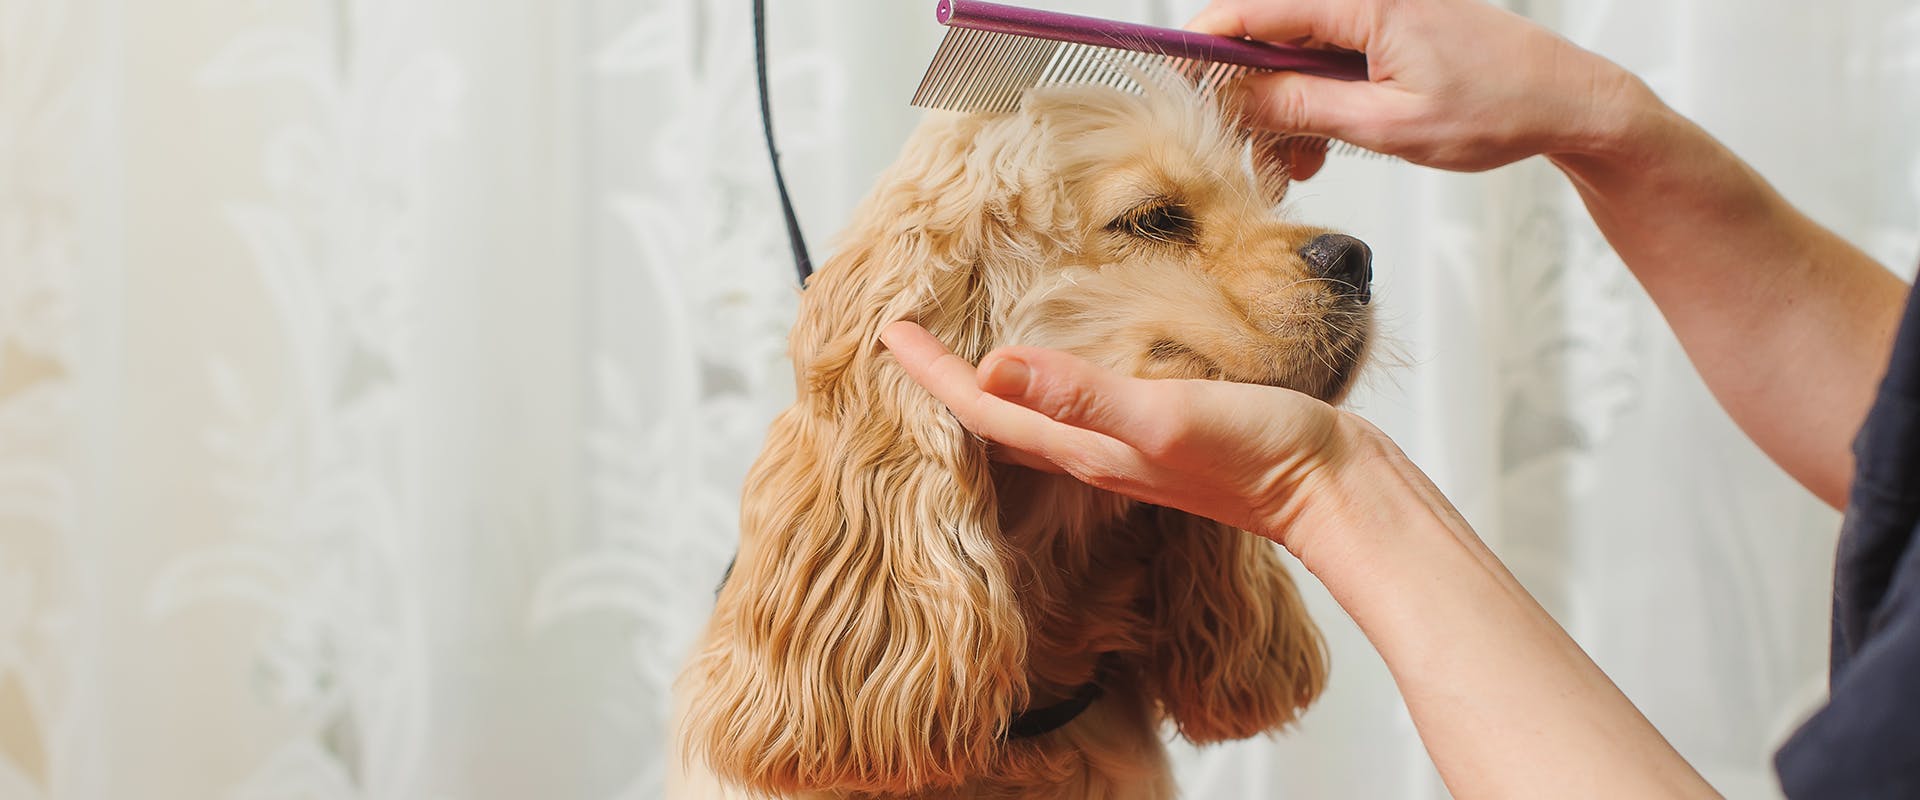 A Cocker Spaniel being groomed